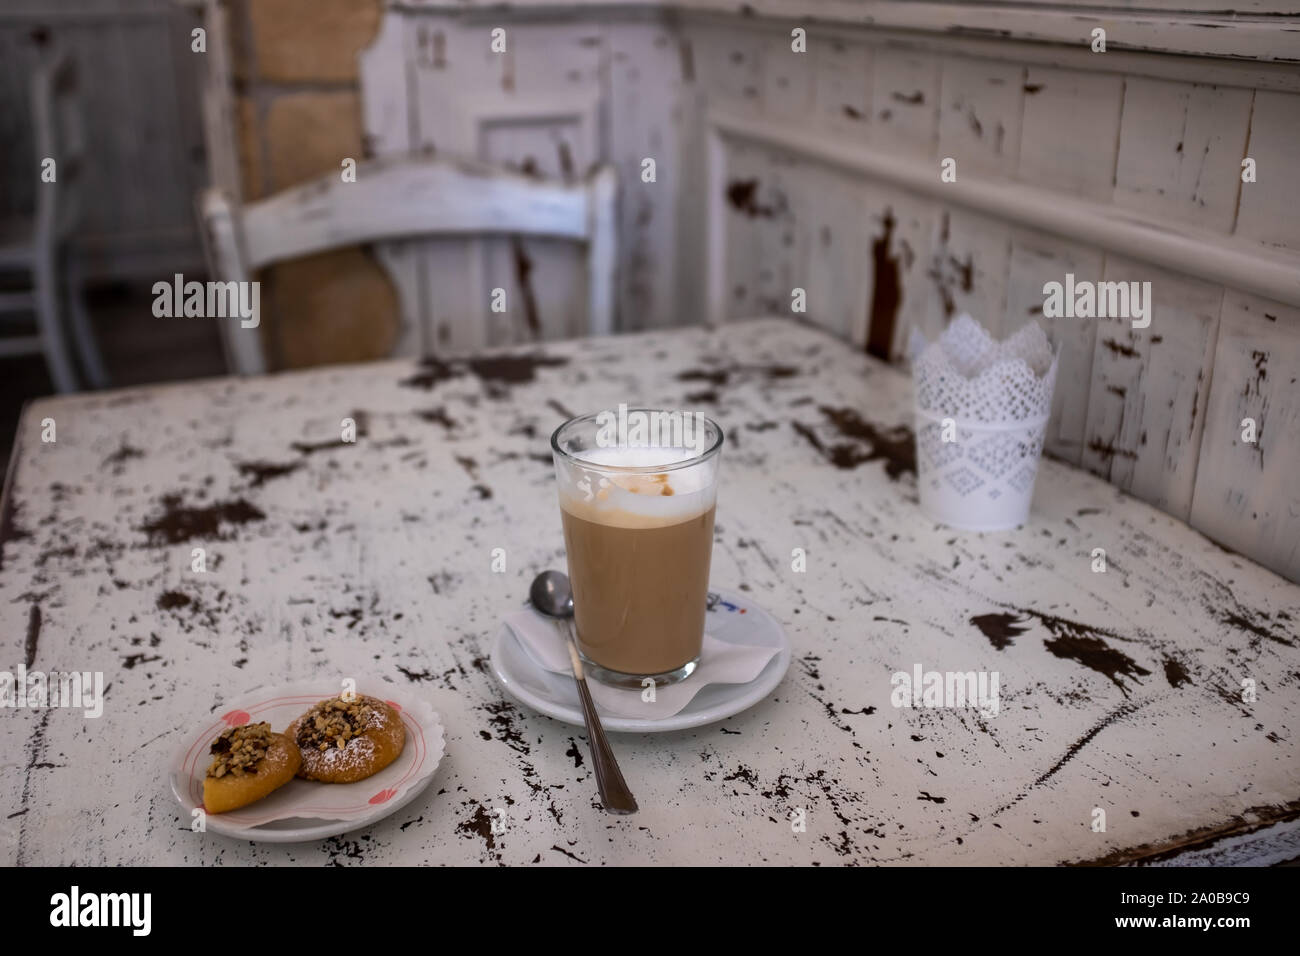 Simple but delicious breakfast in an Italian bar: latte macchiato (spotted milk) and small chocolate pastries. Stock Photo